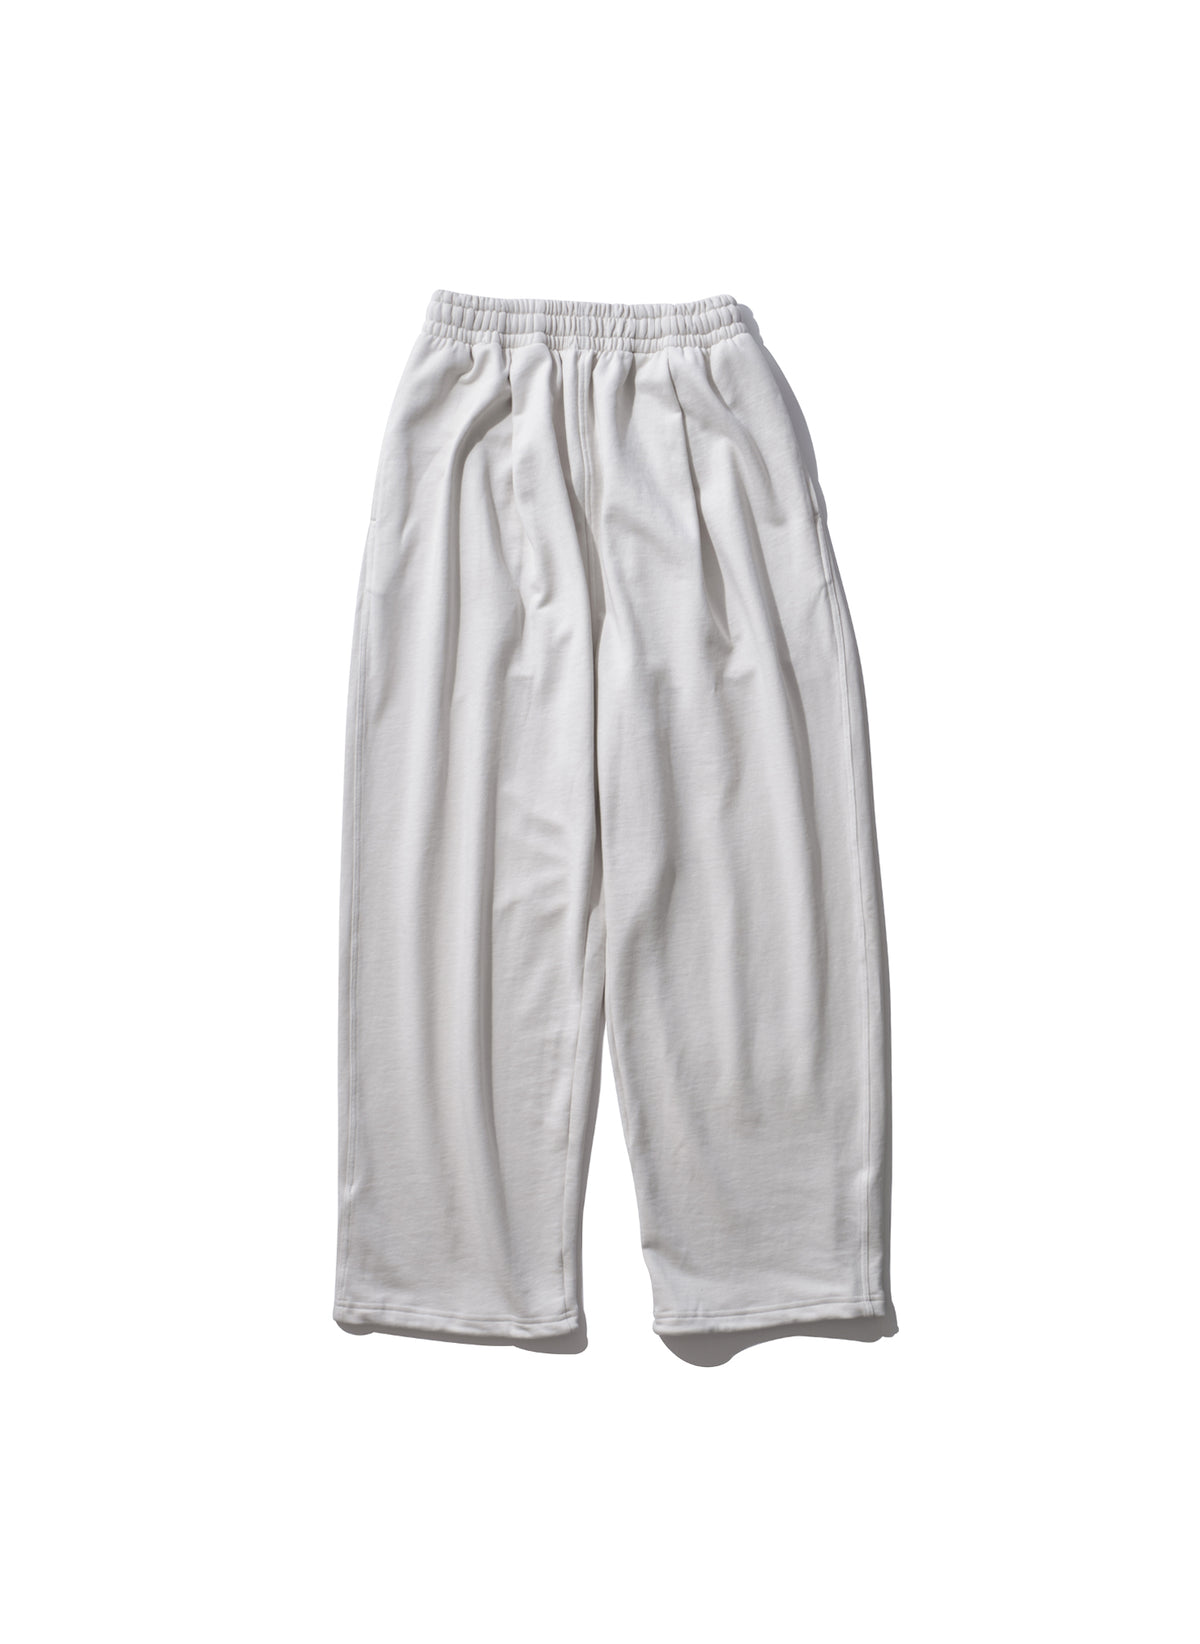 WILLY CHAVARRIA / NORTHSIDER JOGGER PANTS VAPOROUS GRAY